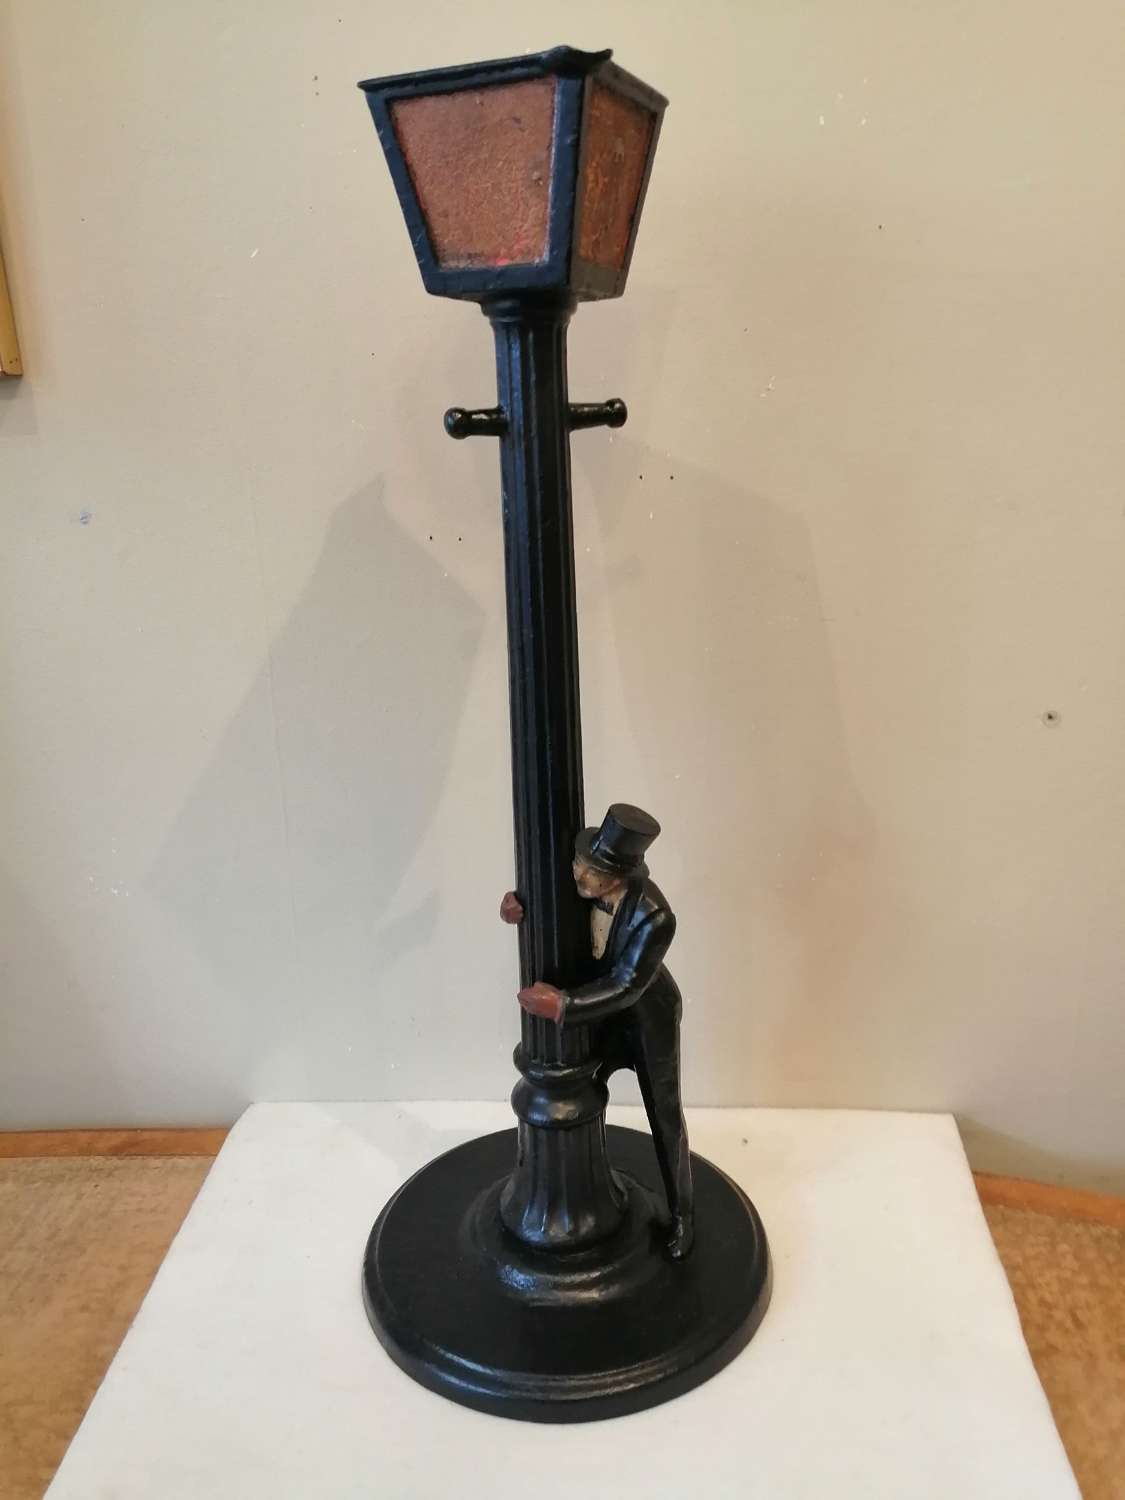 A rare early 20th century cast iron figural candle stand/ashtray